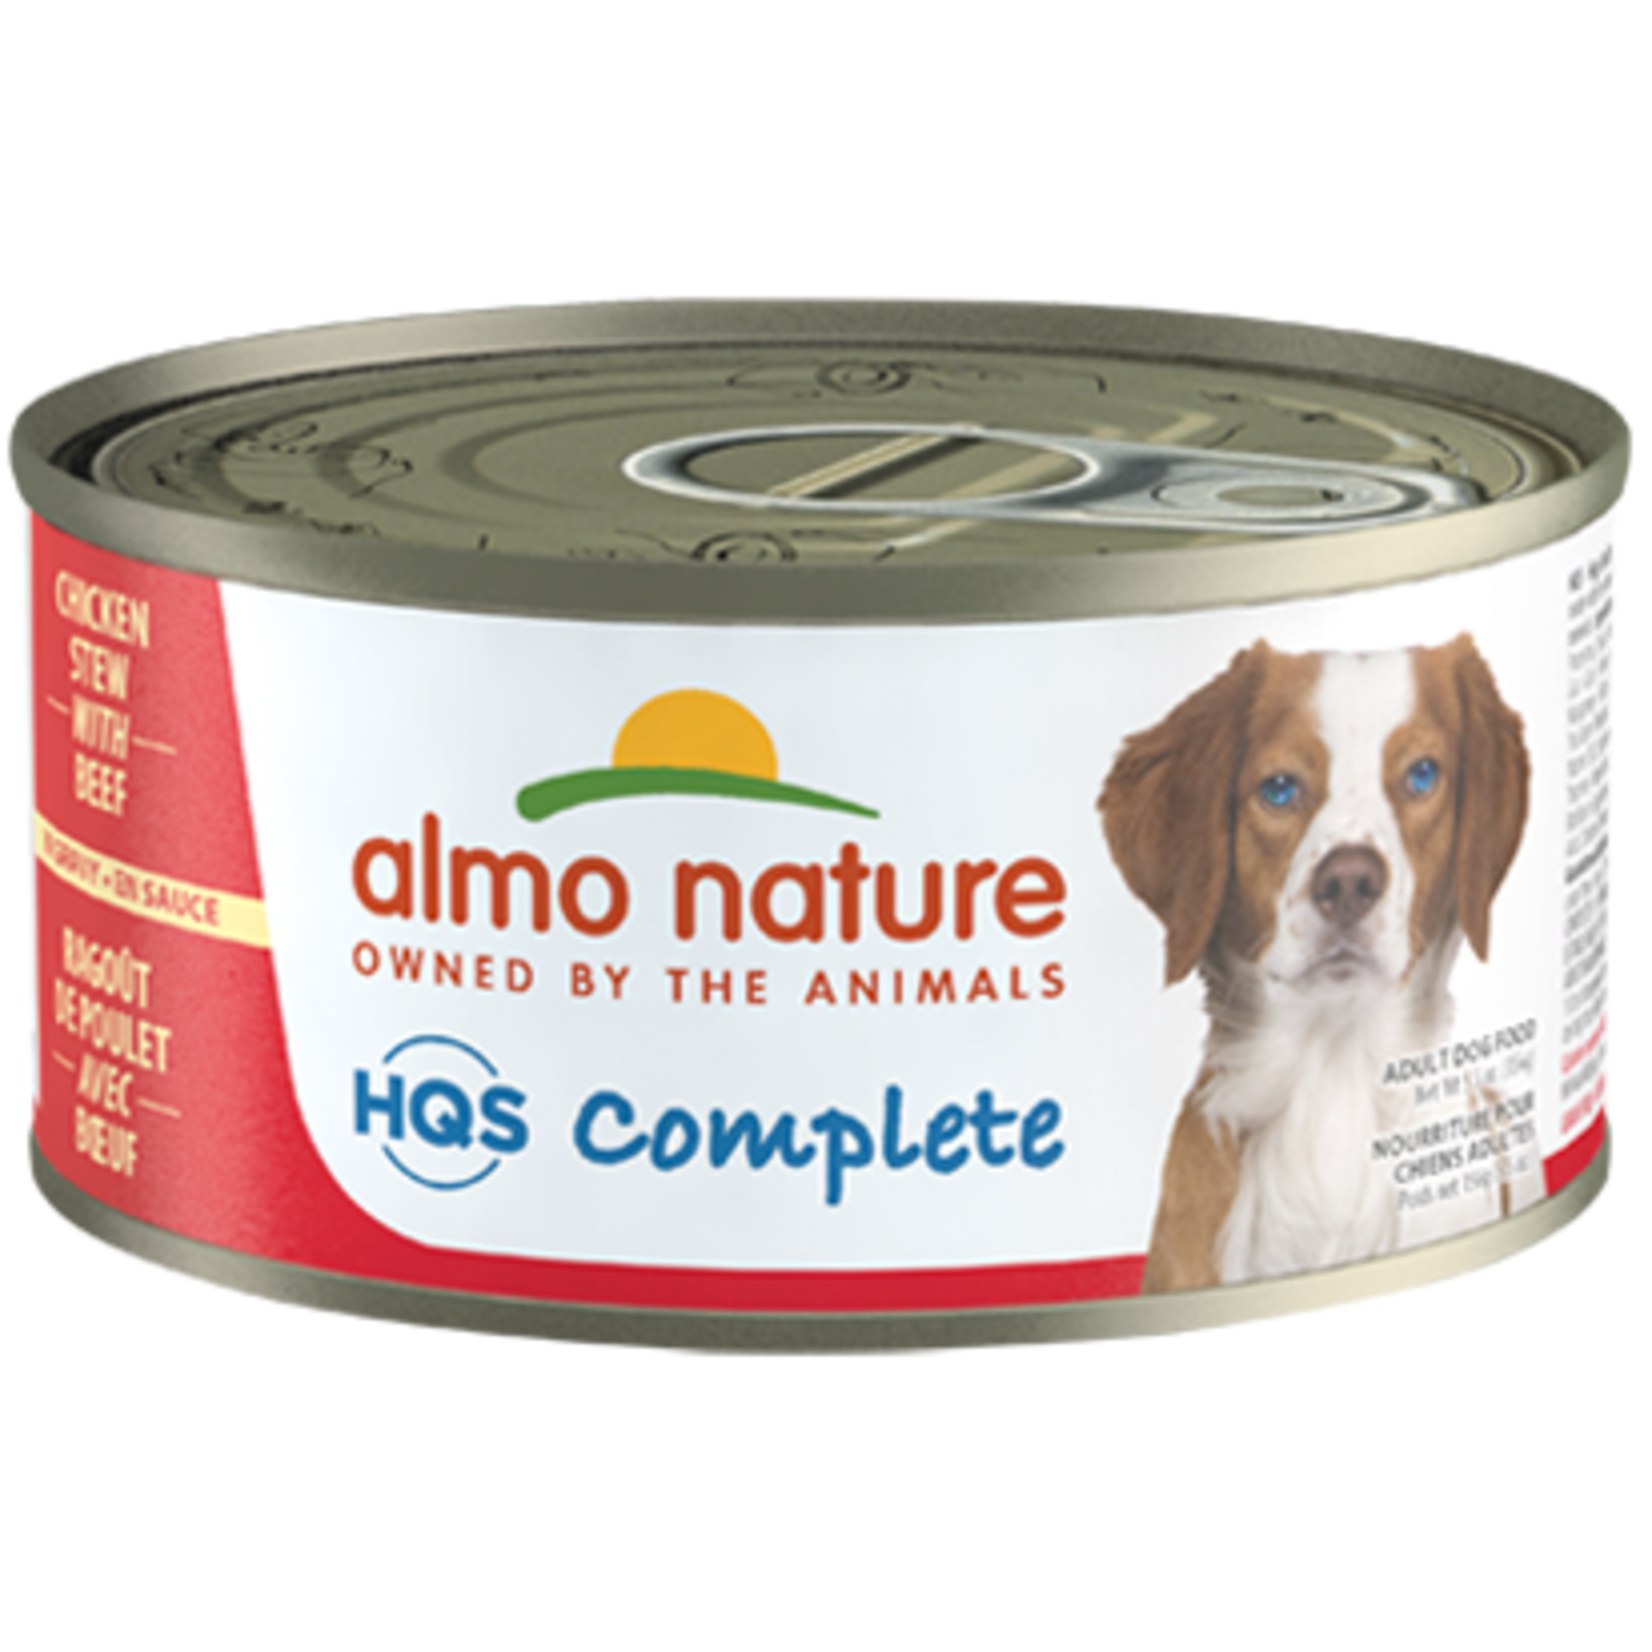 Almo Nature Almo Nature - HQS Complete Dog Cans